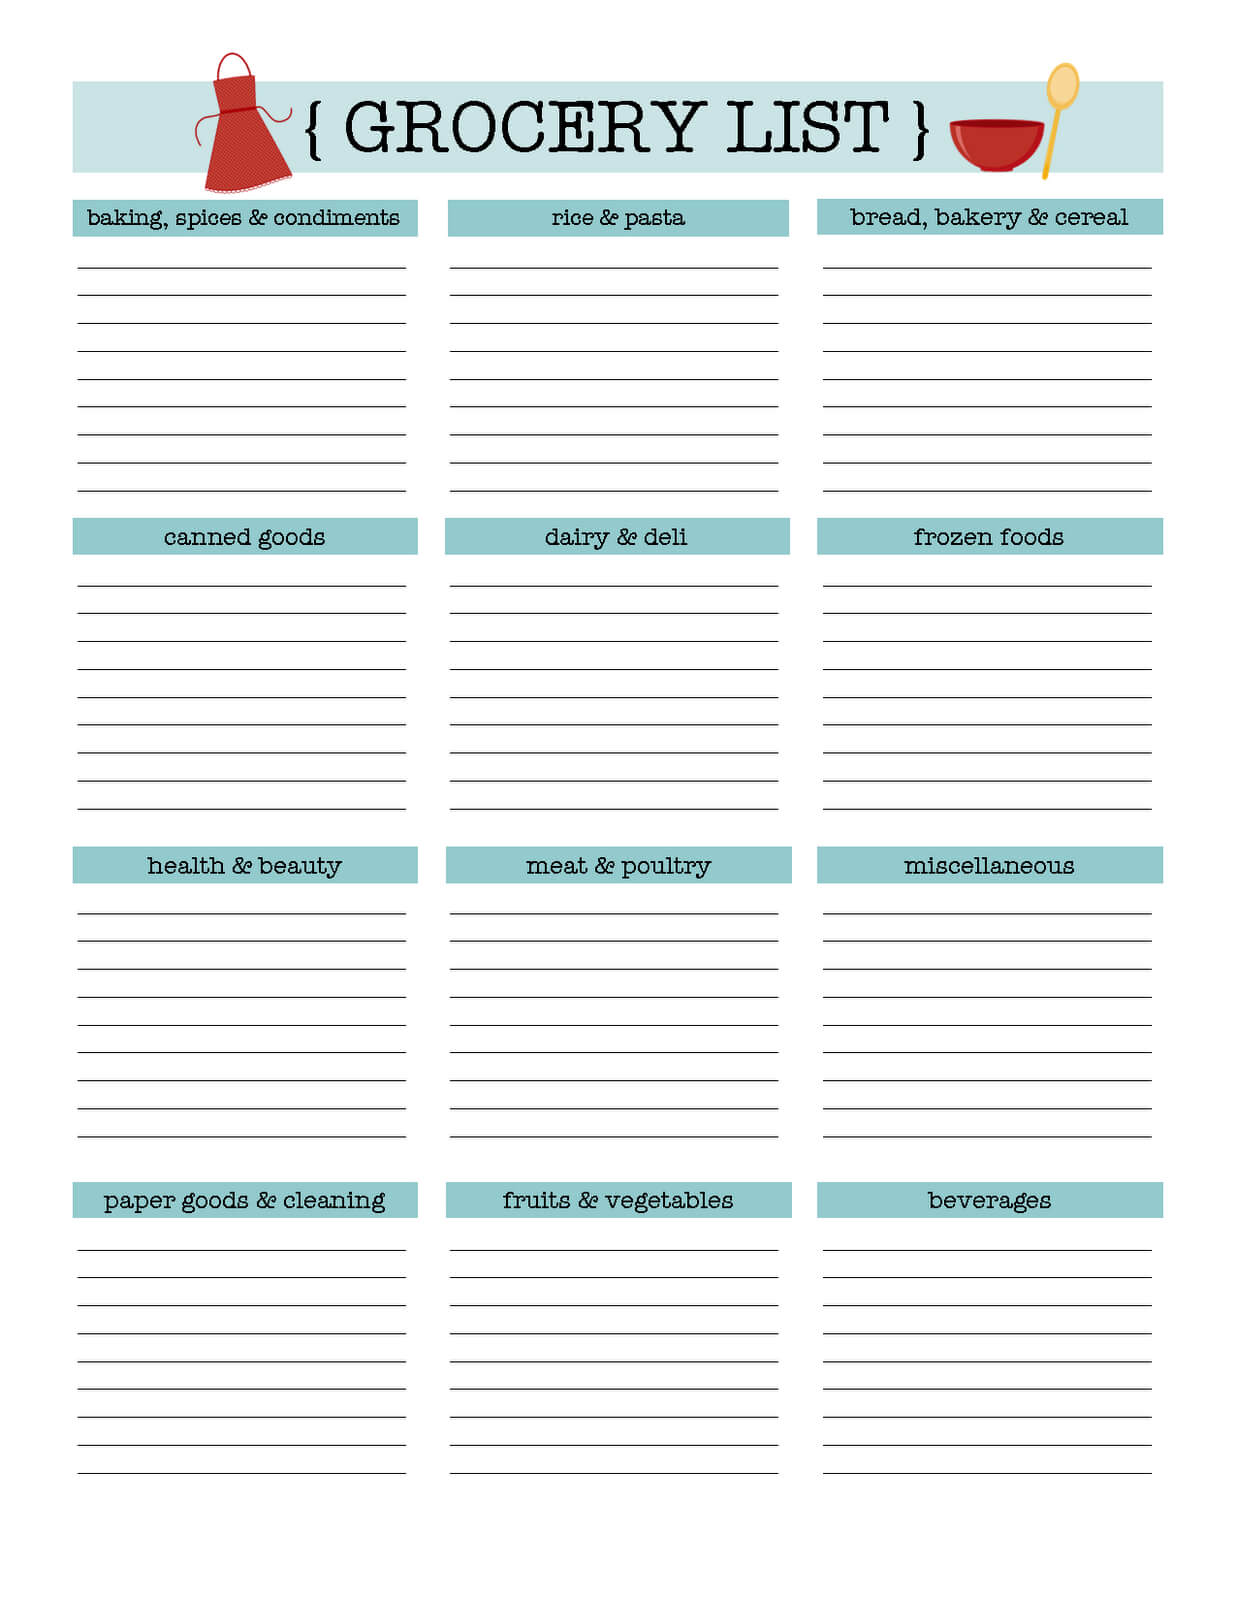 006 Grocery Shopping List Template Ideas Unforgettable Free Pertaining To Blank Grocery Shopping List Template